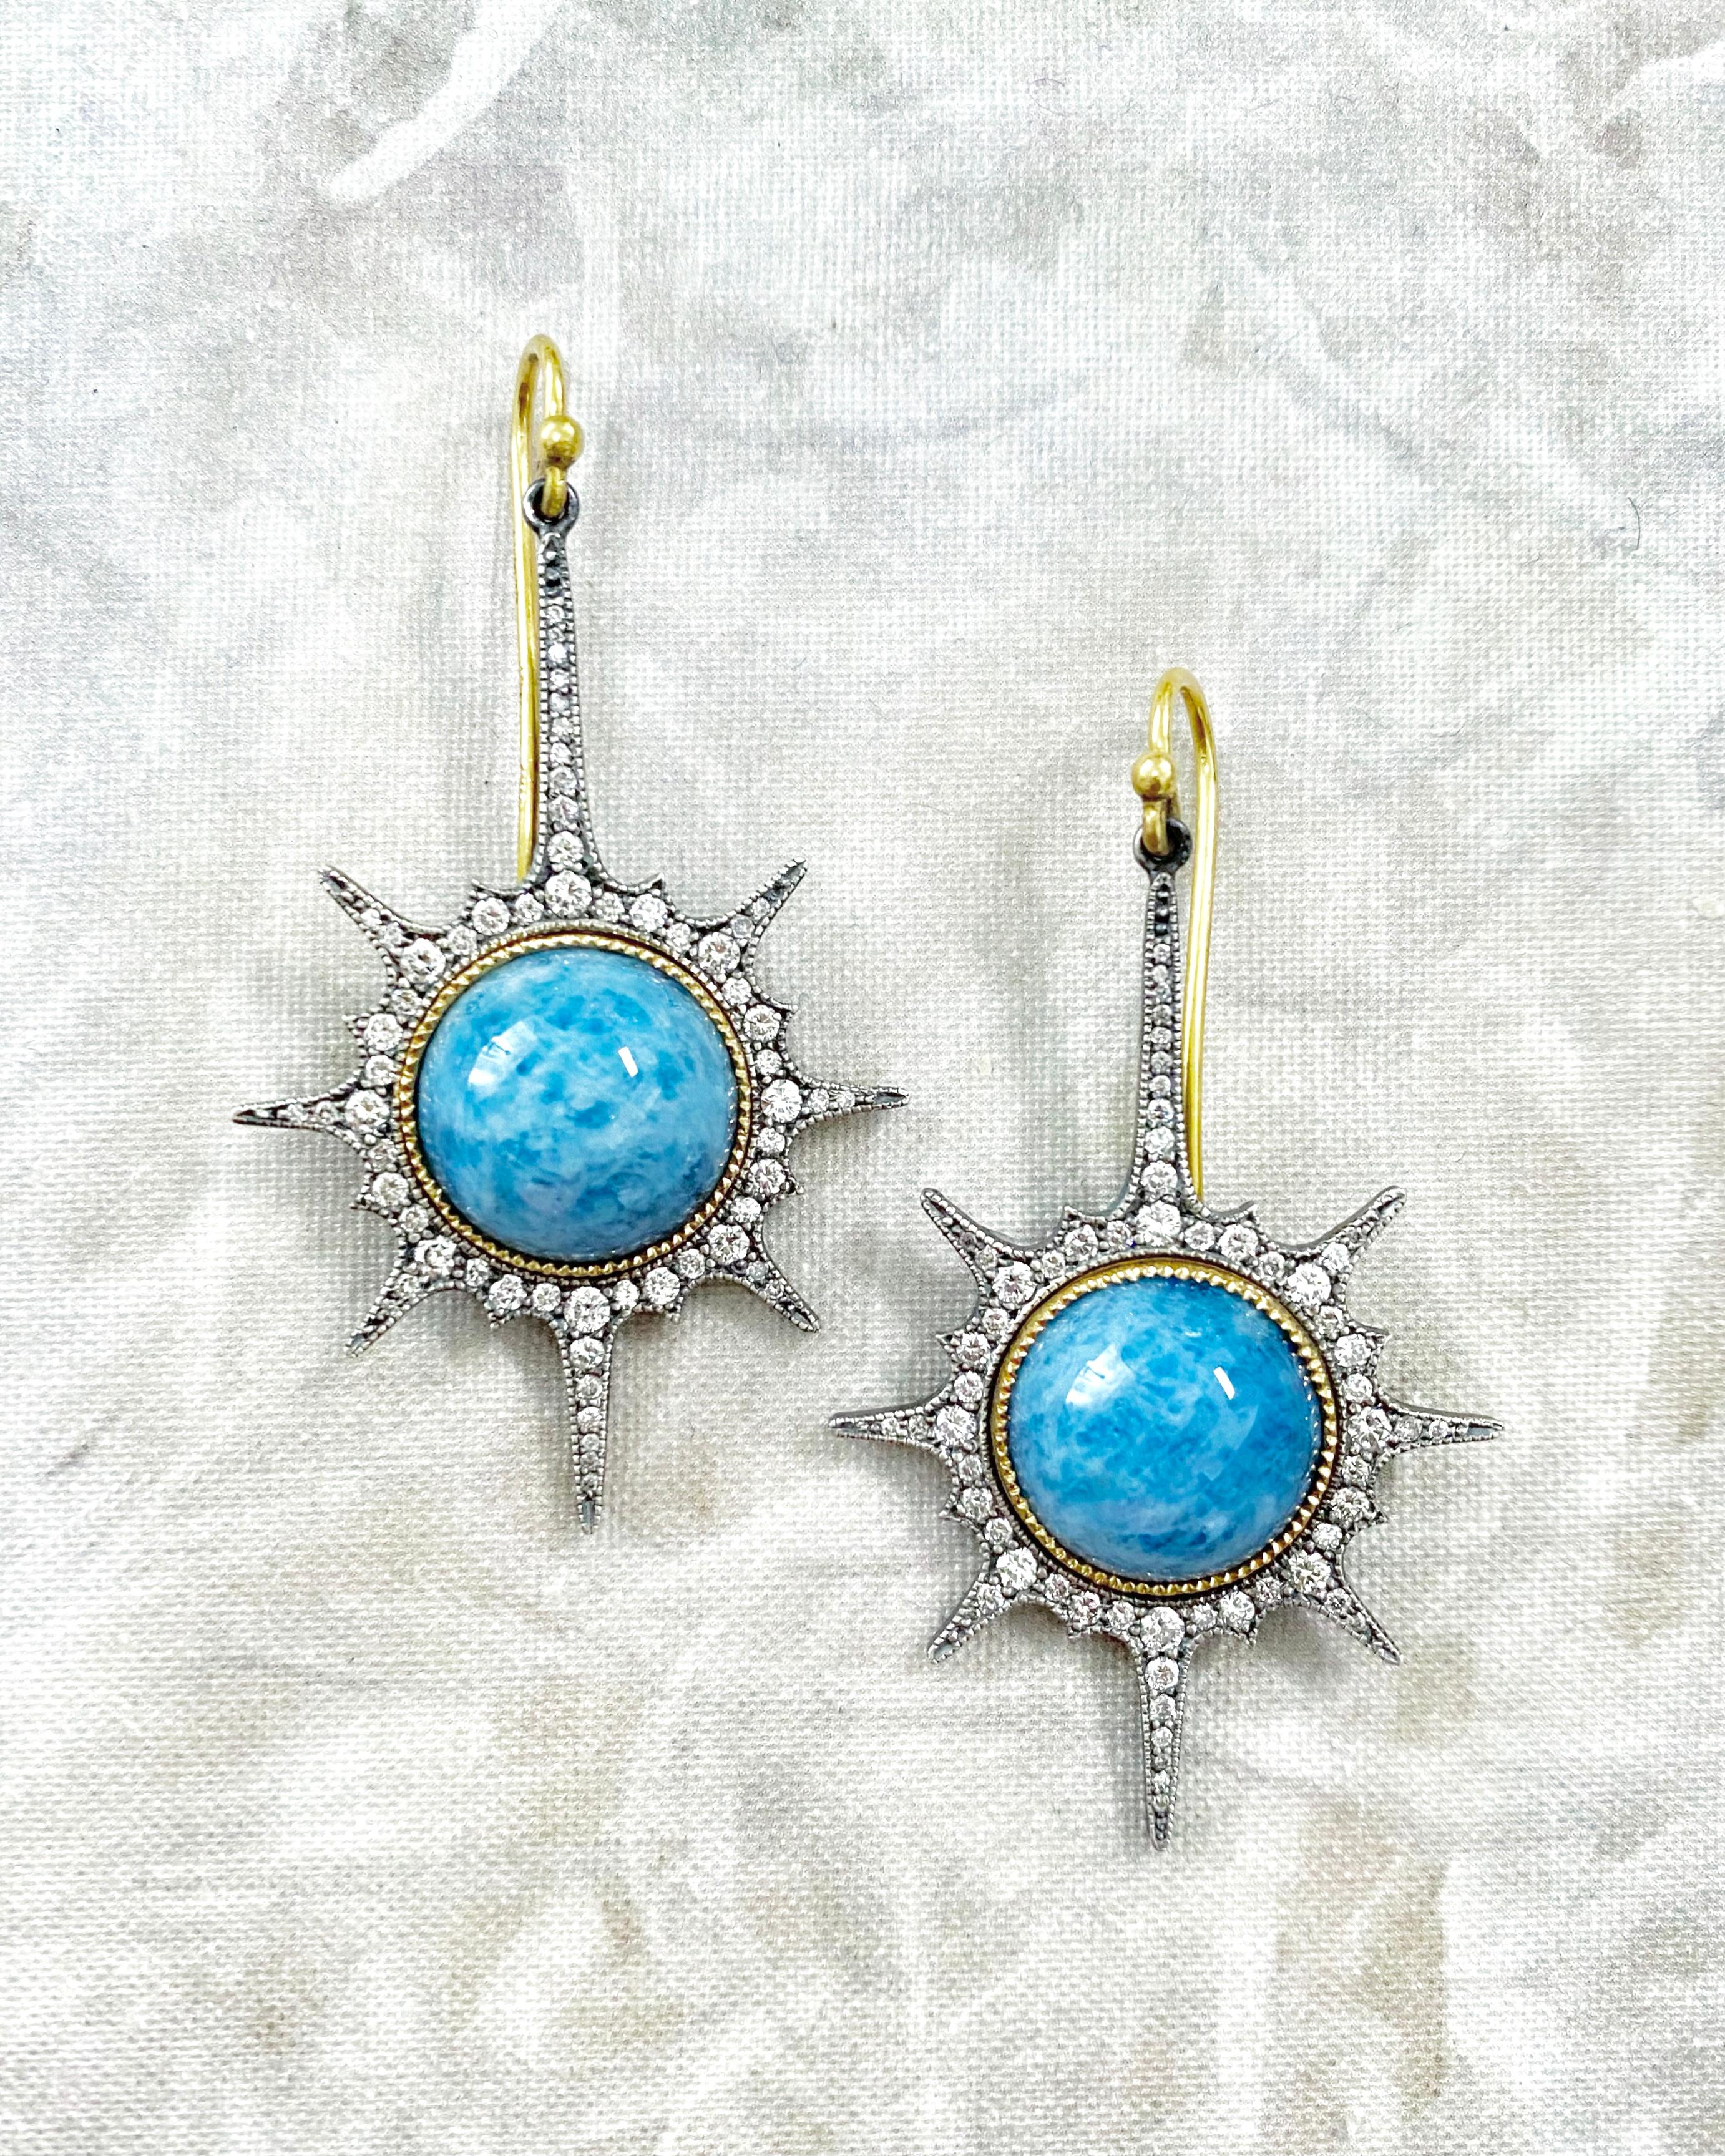 Aquamarine and diamond drop earrings in 22k gold and oxidized silver. 

French Wire, For Pierced Ears

Designed and handmade in Los Angeles